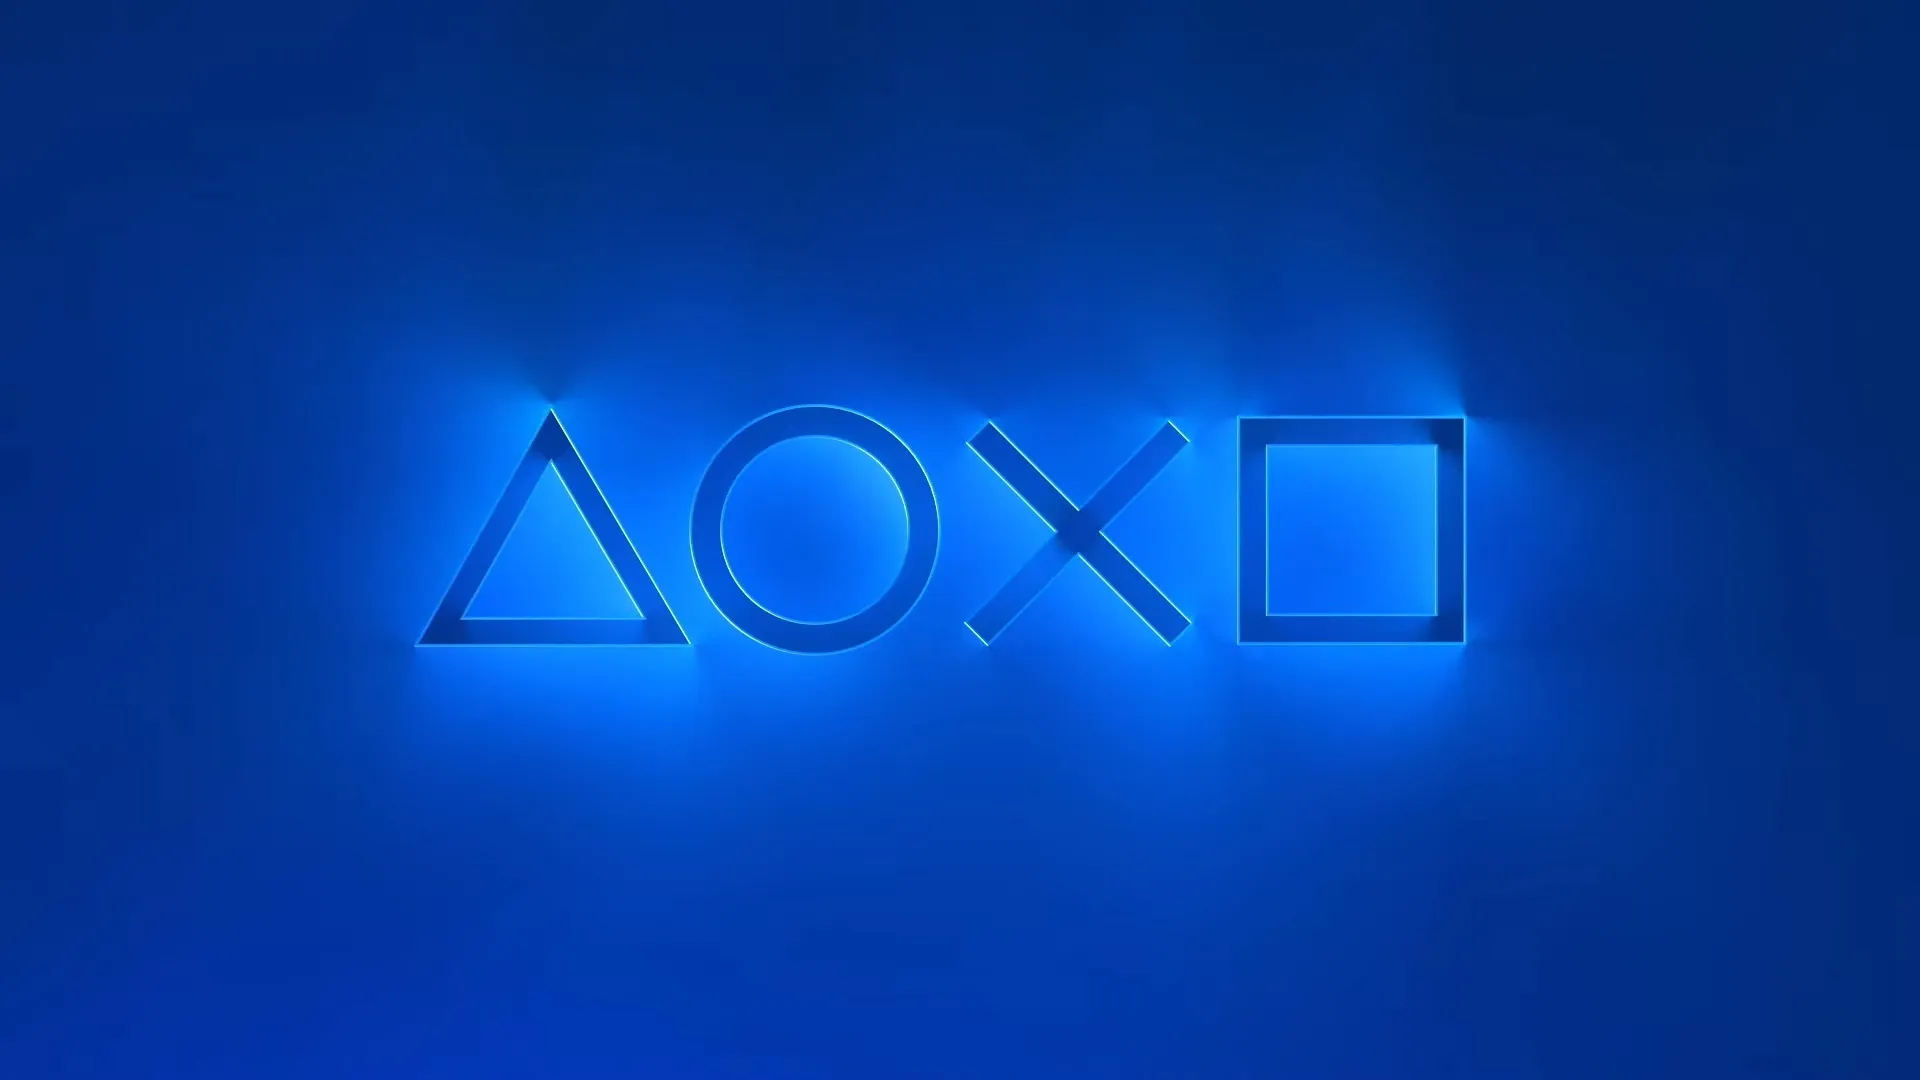 PlayStation Showcase broadcast to take place on Sept. 9 - Dot Esports